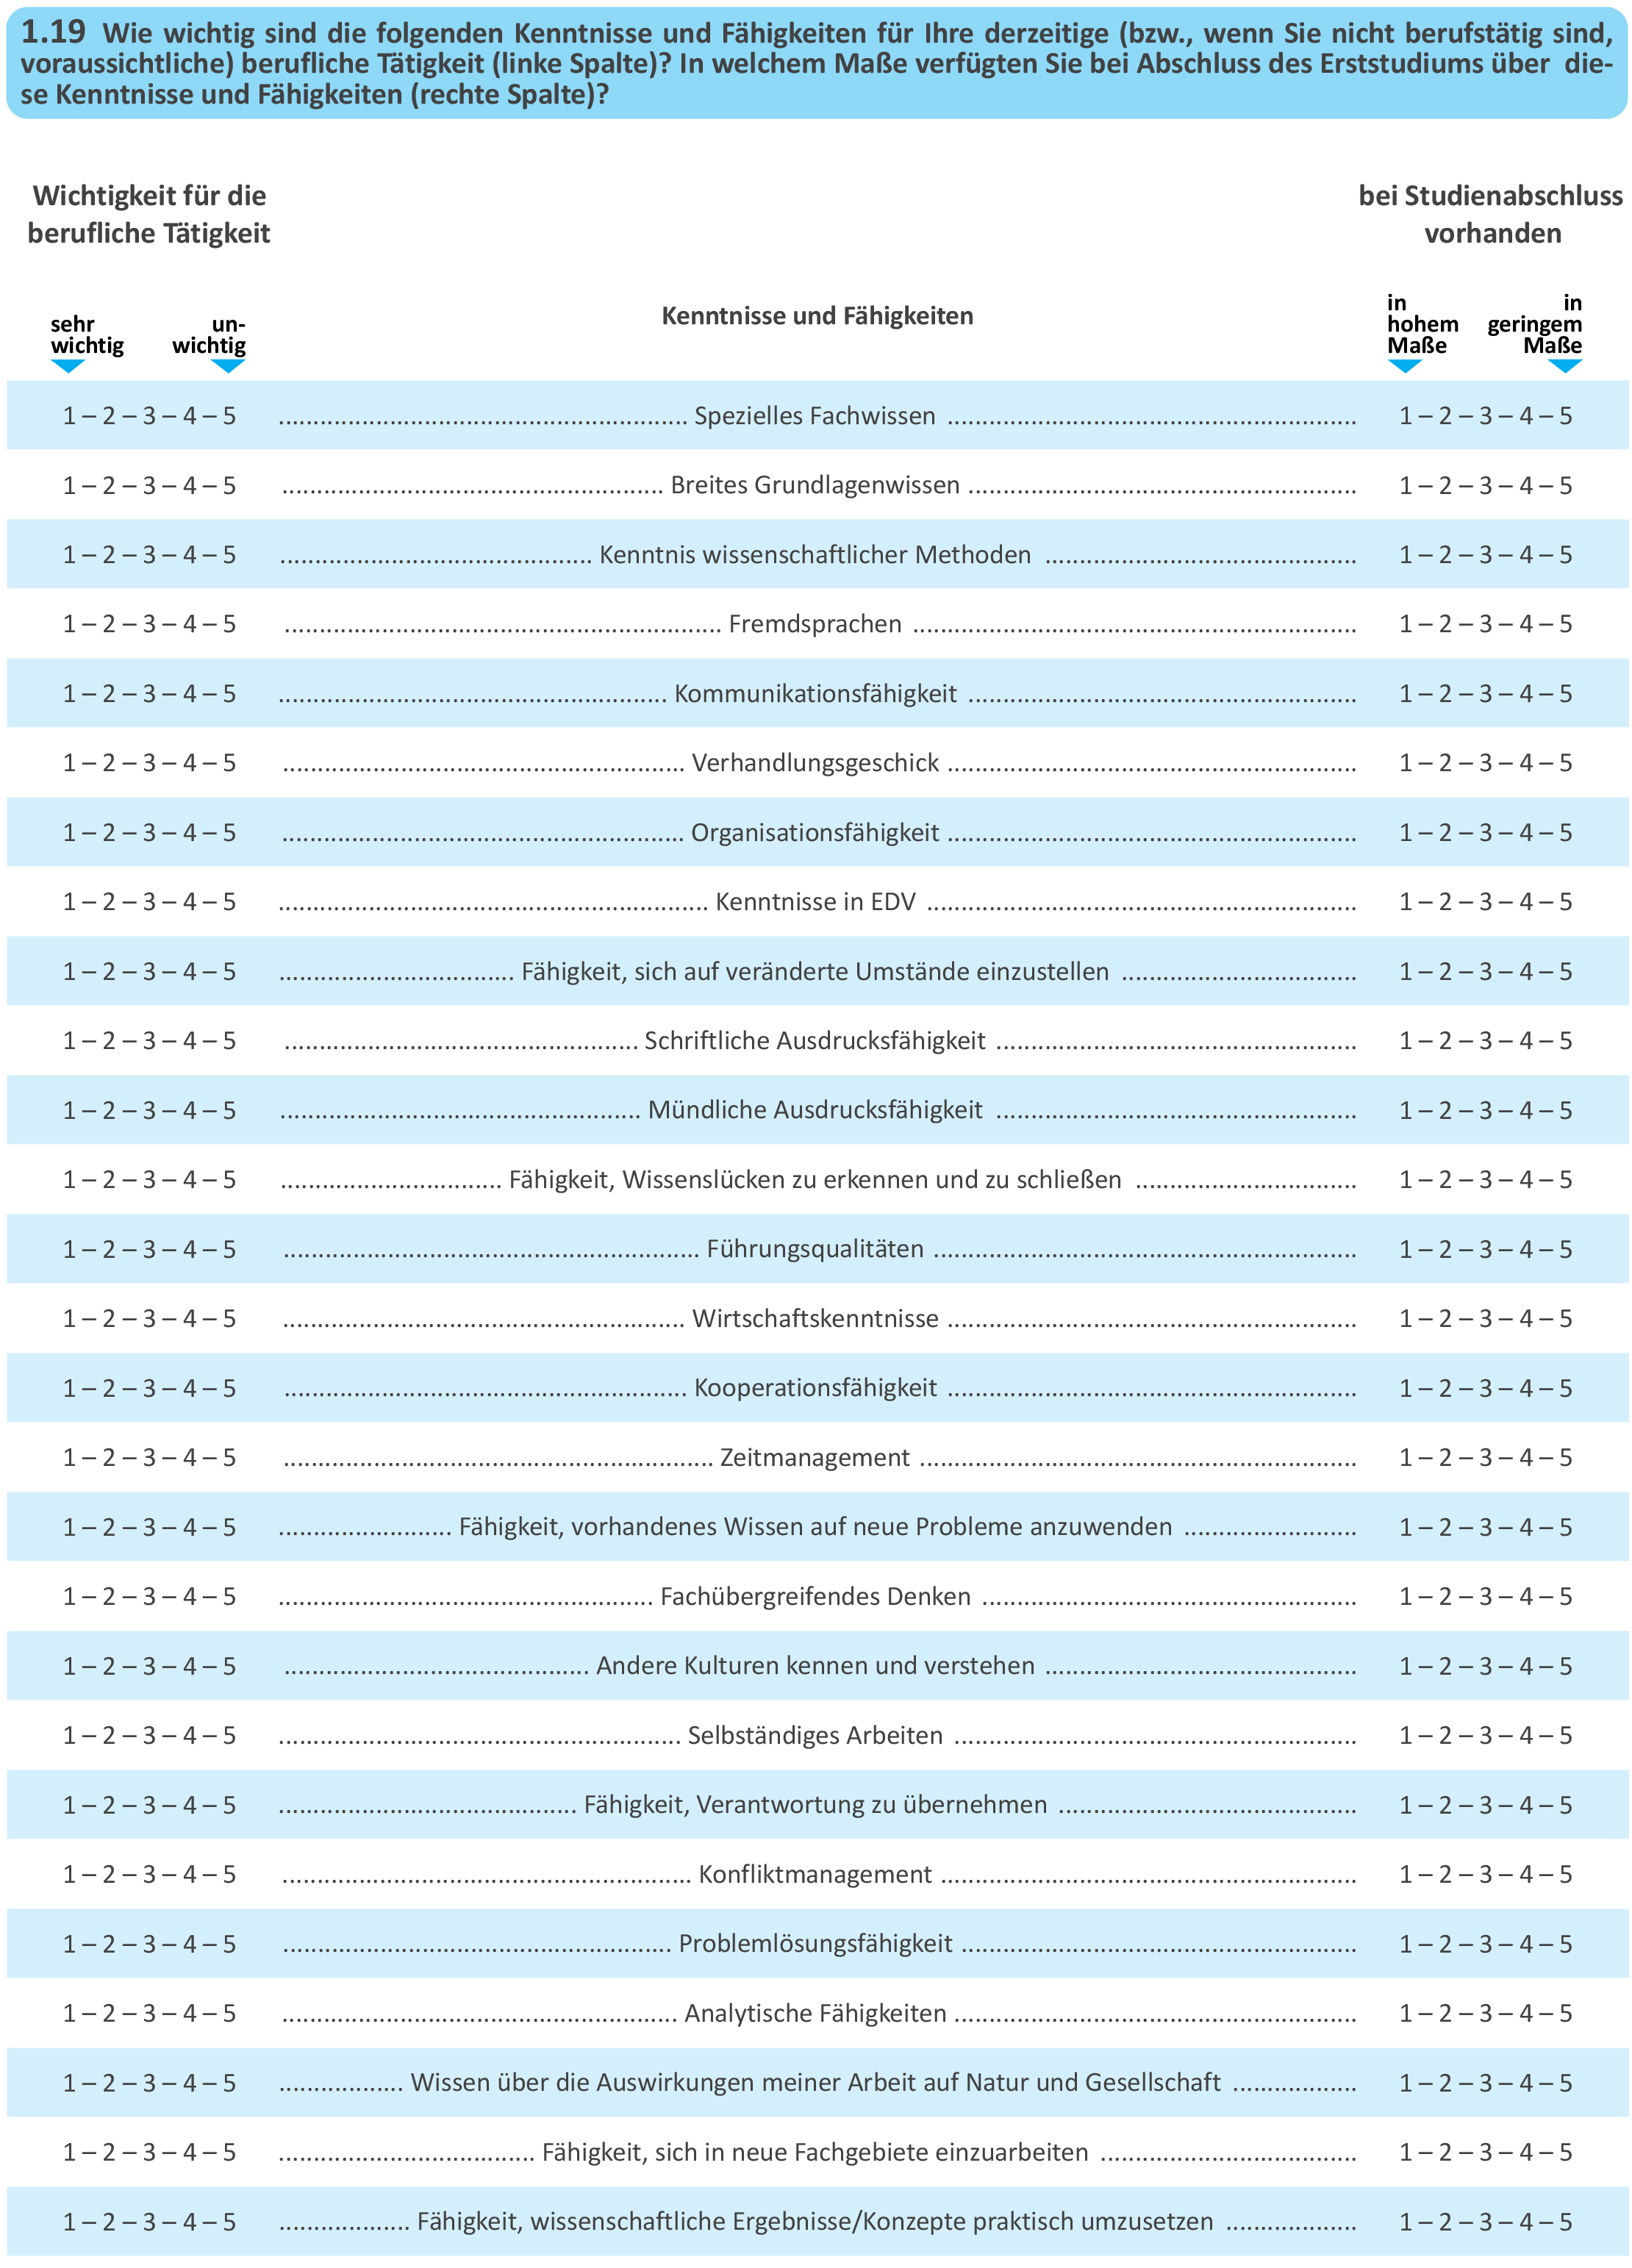 How important are the following skills and competencies for your current (or future, if you are not working at the moment) professional activity (left column)? To what extent did you possess these skills and competencies when you graduated (right column)?